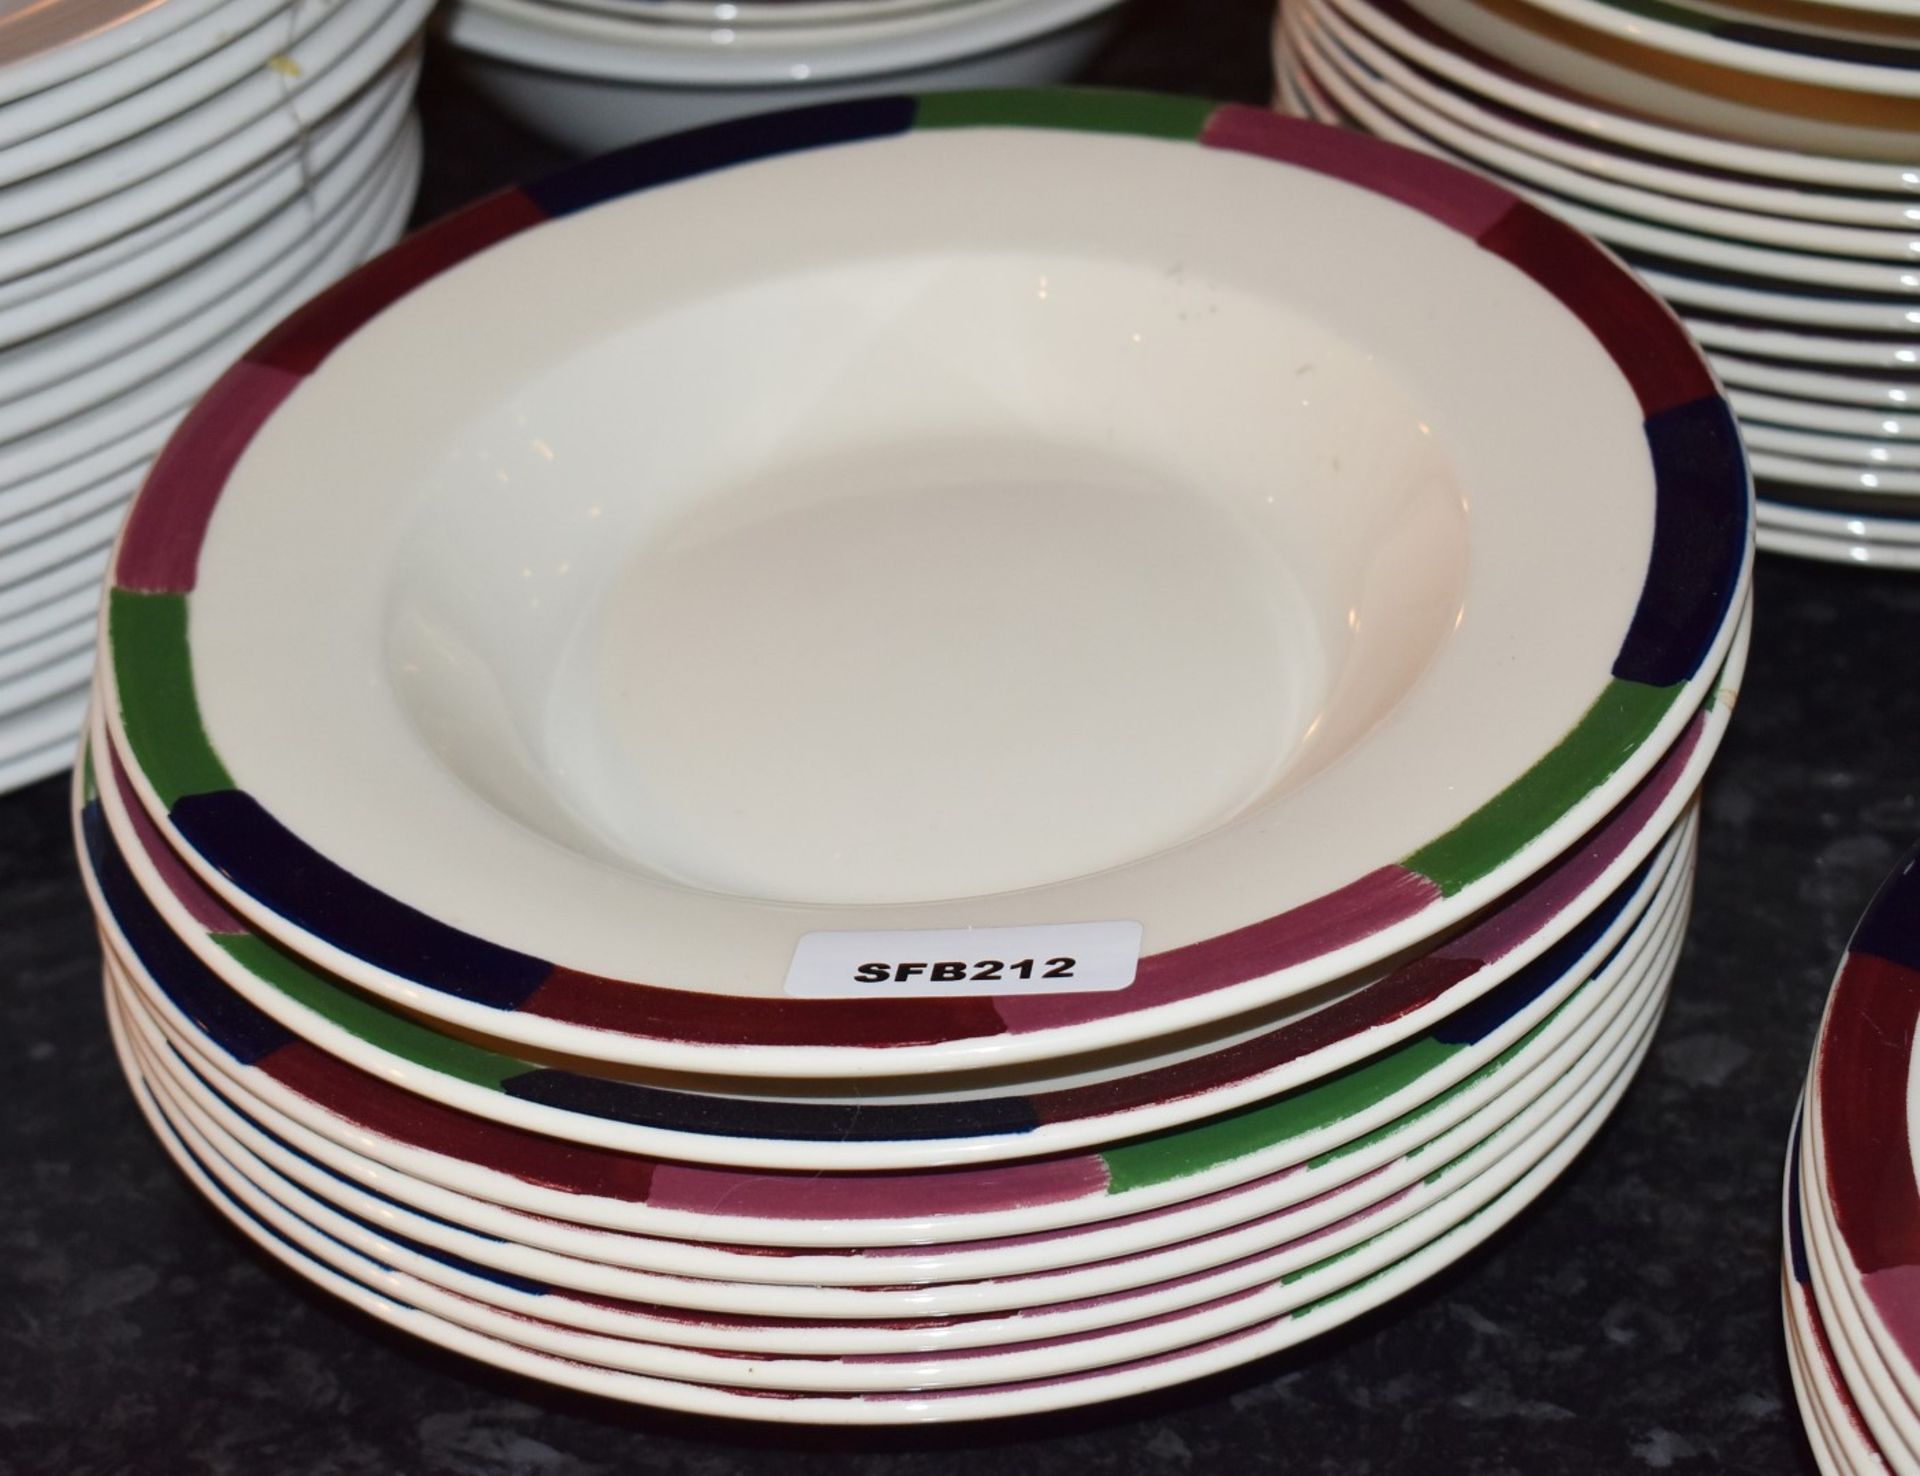 1 x Large Assortment Of Commercial Restaurant Tableware Including Plates, Bowls And Glasses - Image 2 of 7